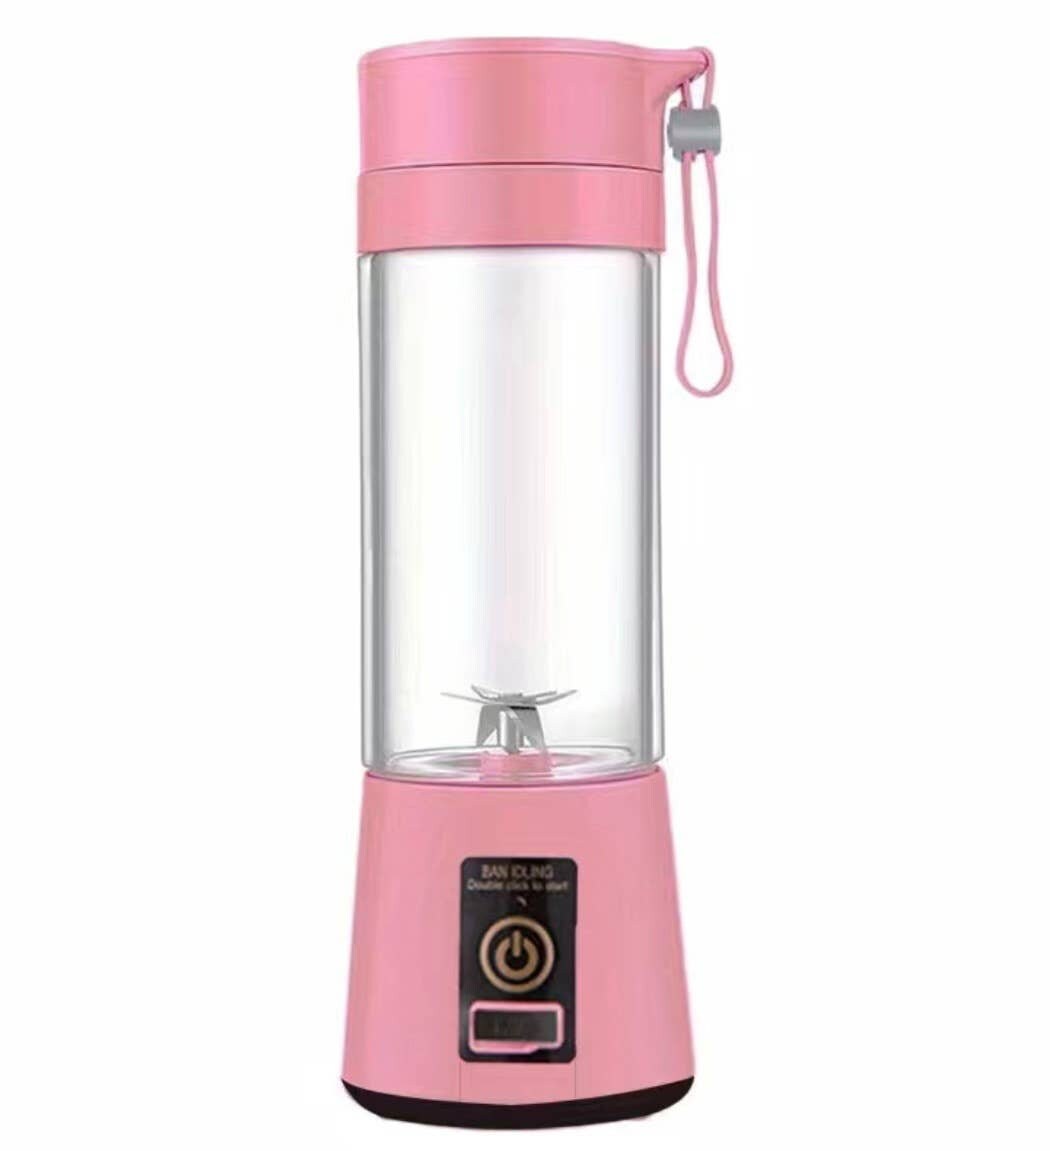 Dropship Portable Juicer Mini Home Fruit Juicer Cup USB Charging Juice  Juice Machine Juice Cup Gift to Sell Online at a Lower Price